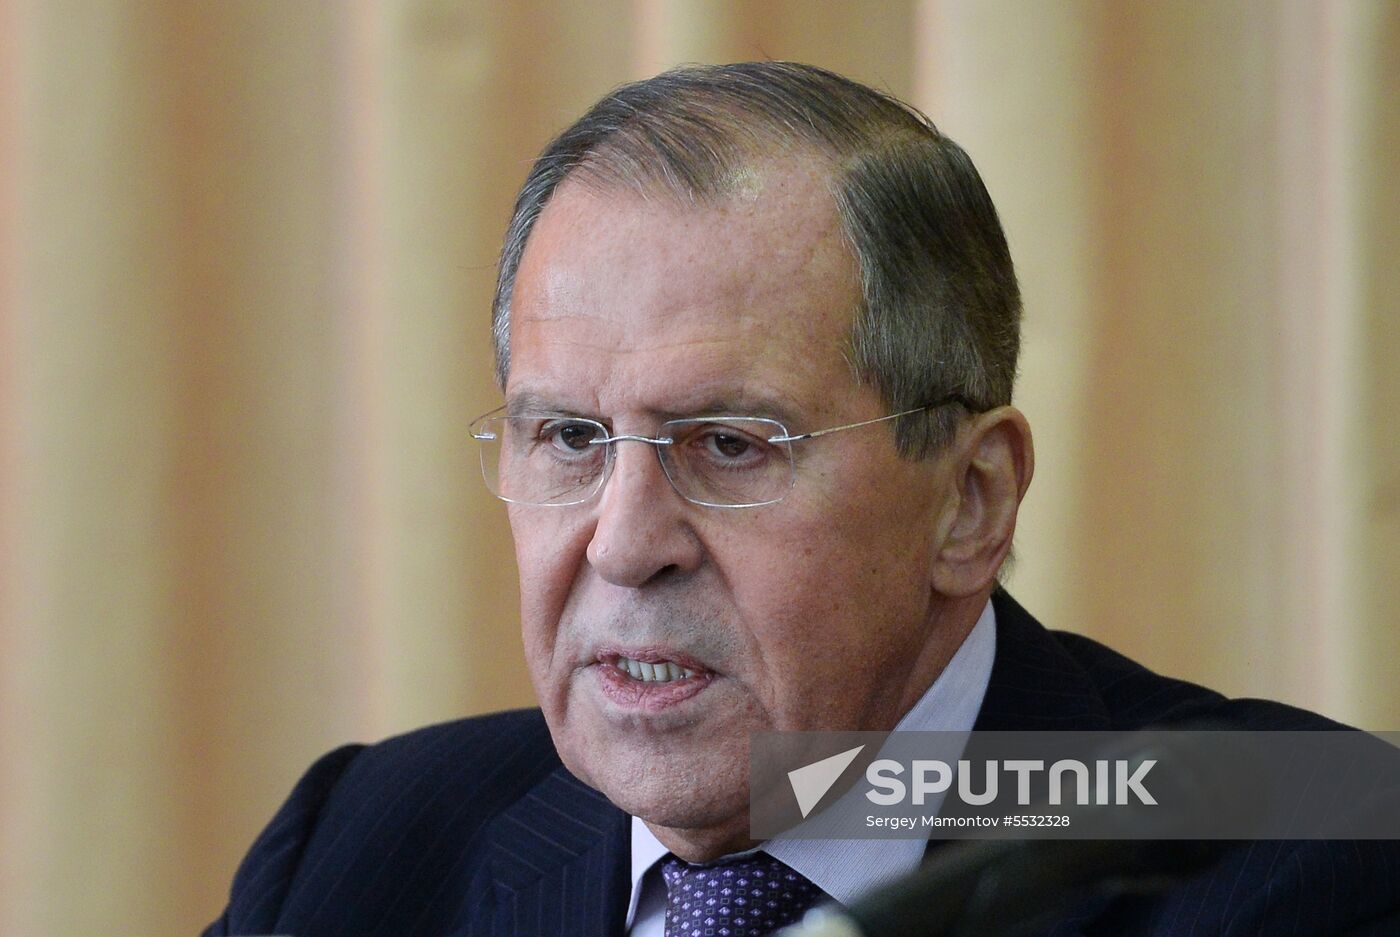 Foreign Minister Sergei Lavrov meets with representatives of Russian NGOs